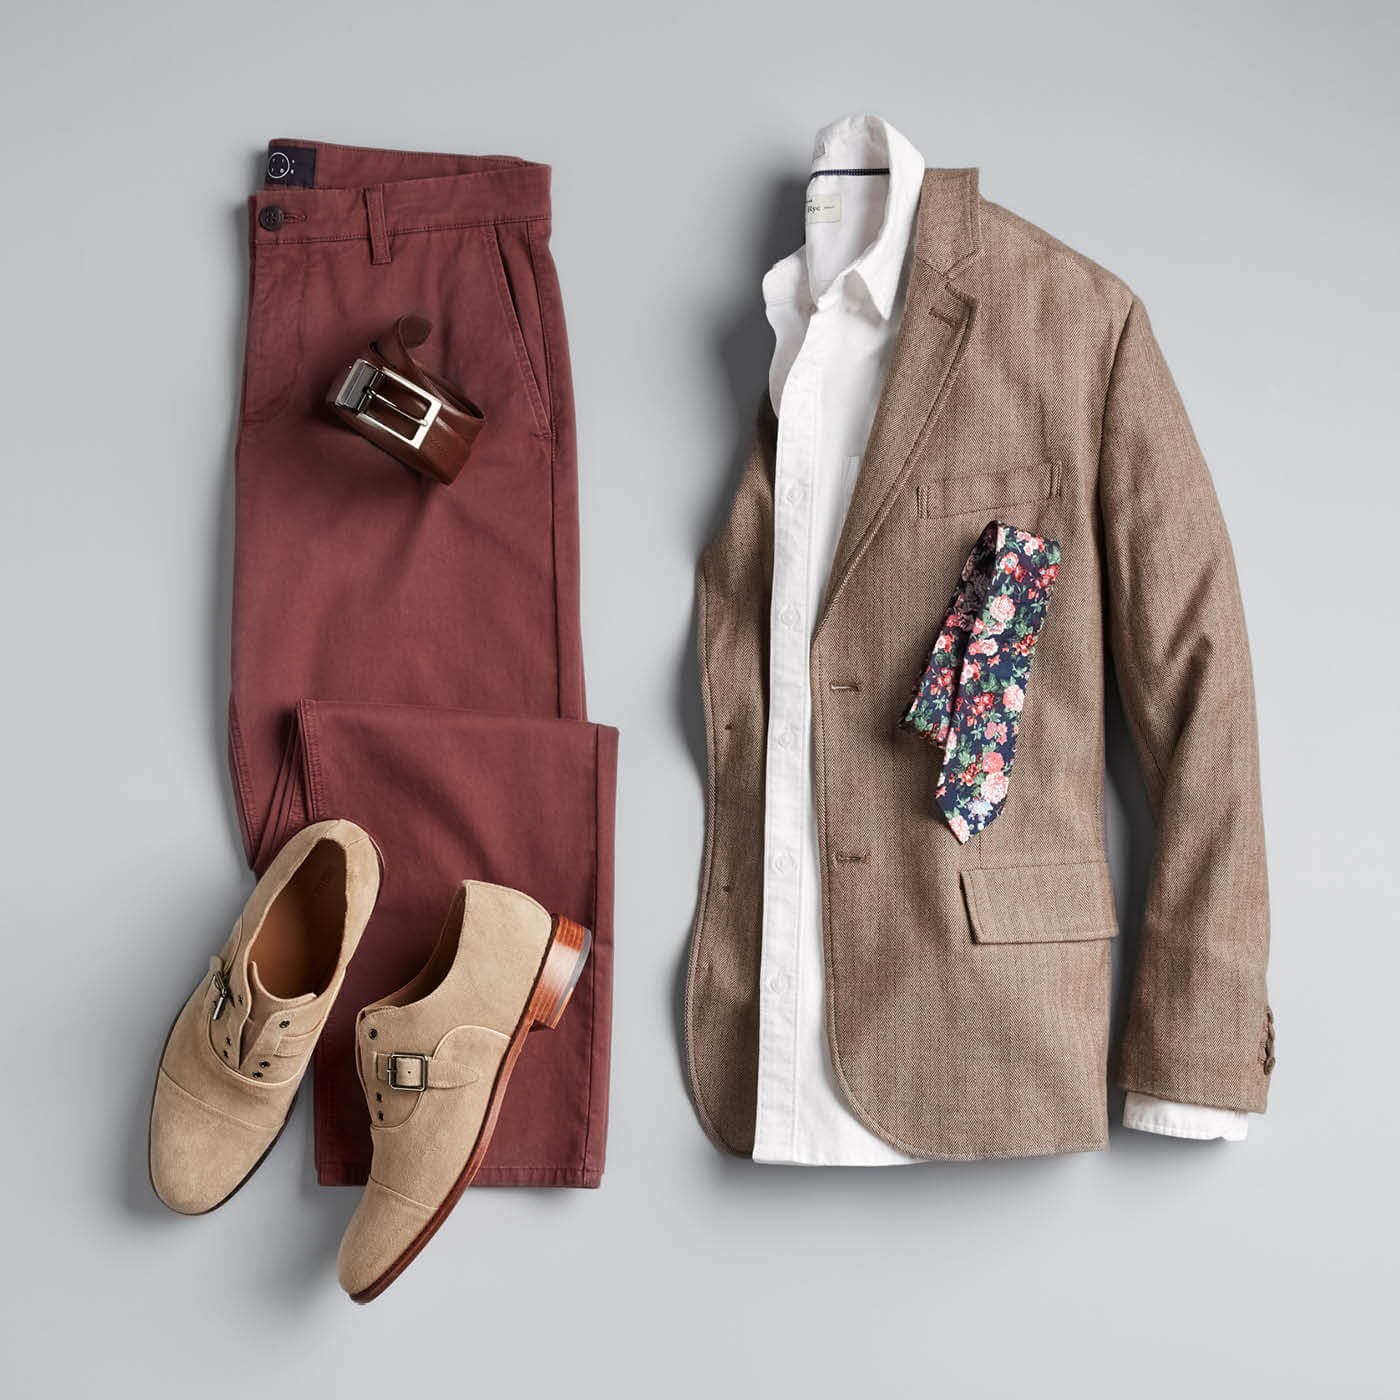 Semi Formal Wedding Attire Male | What Is the Appropriate Look? – Nimble  Made